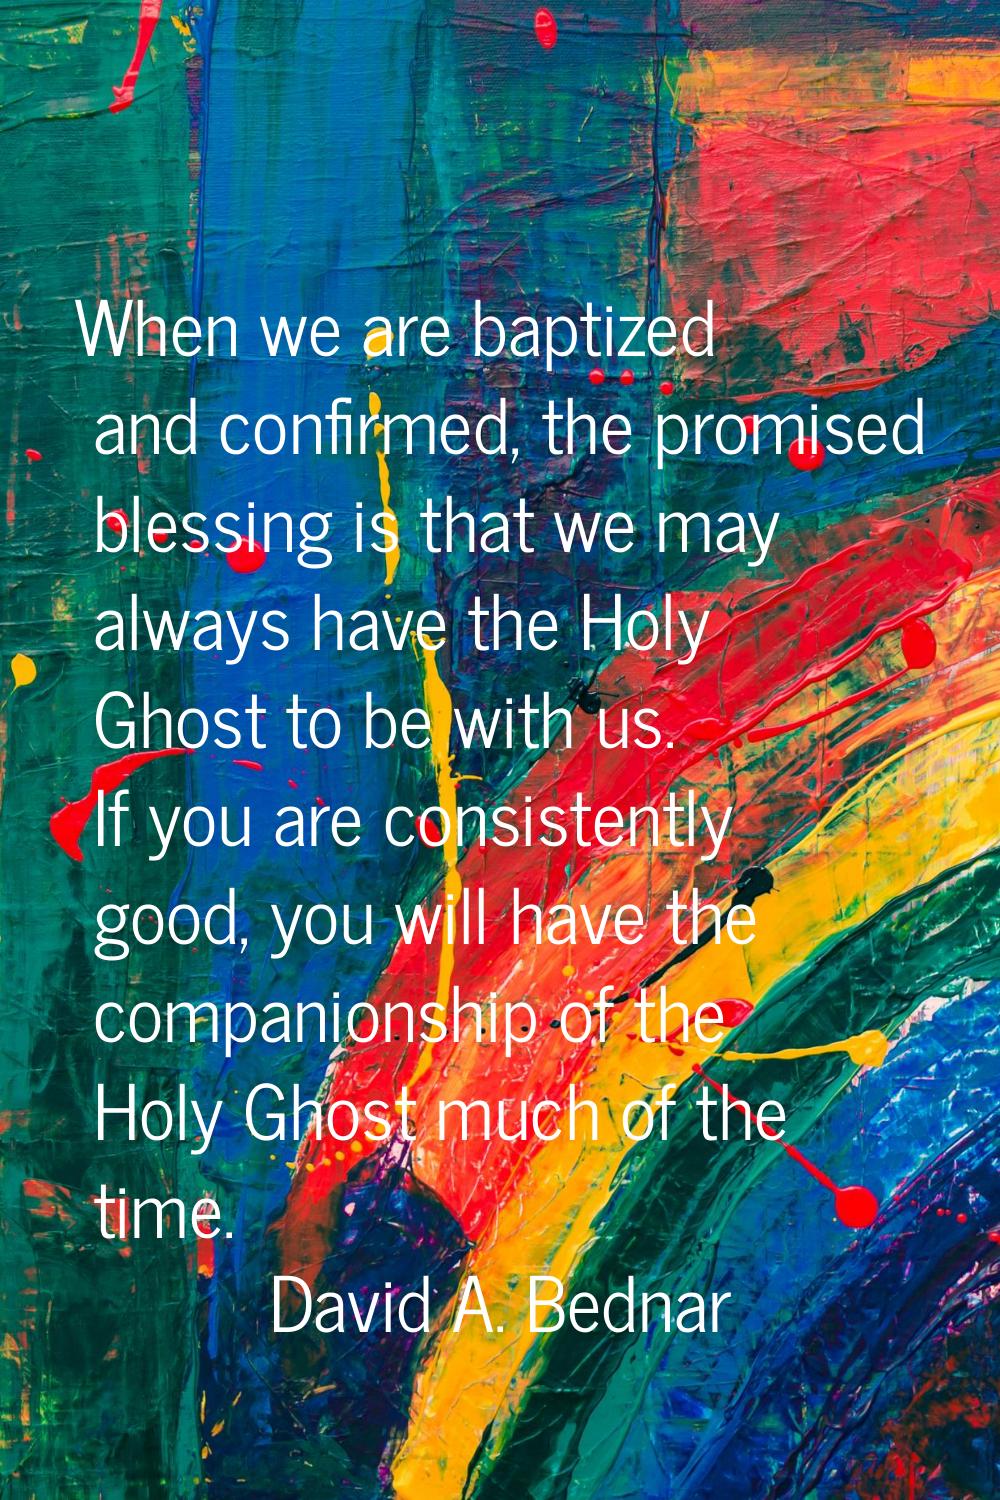 When we are baptized and confirmed, the promised blessing is that we may always have the Holy Ghost